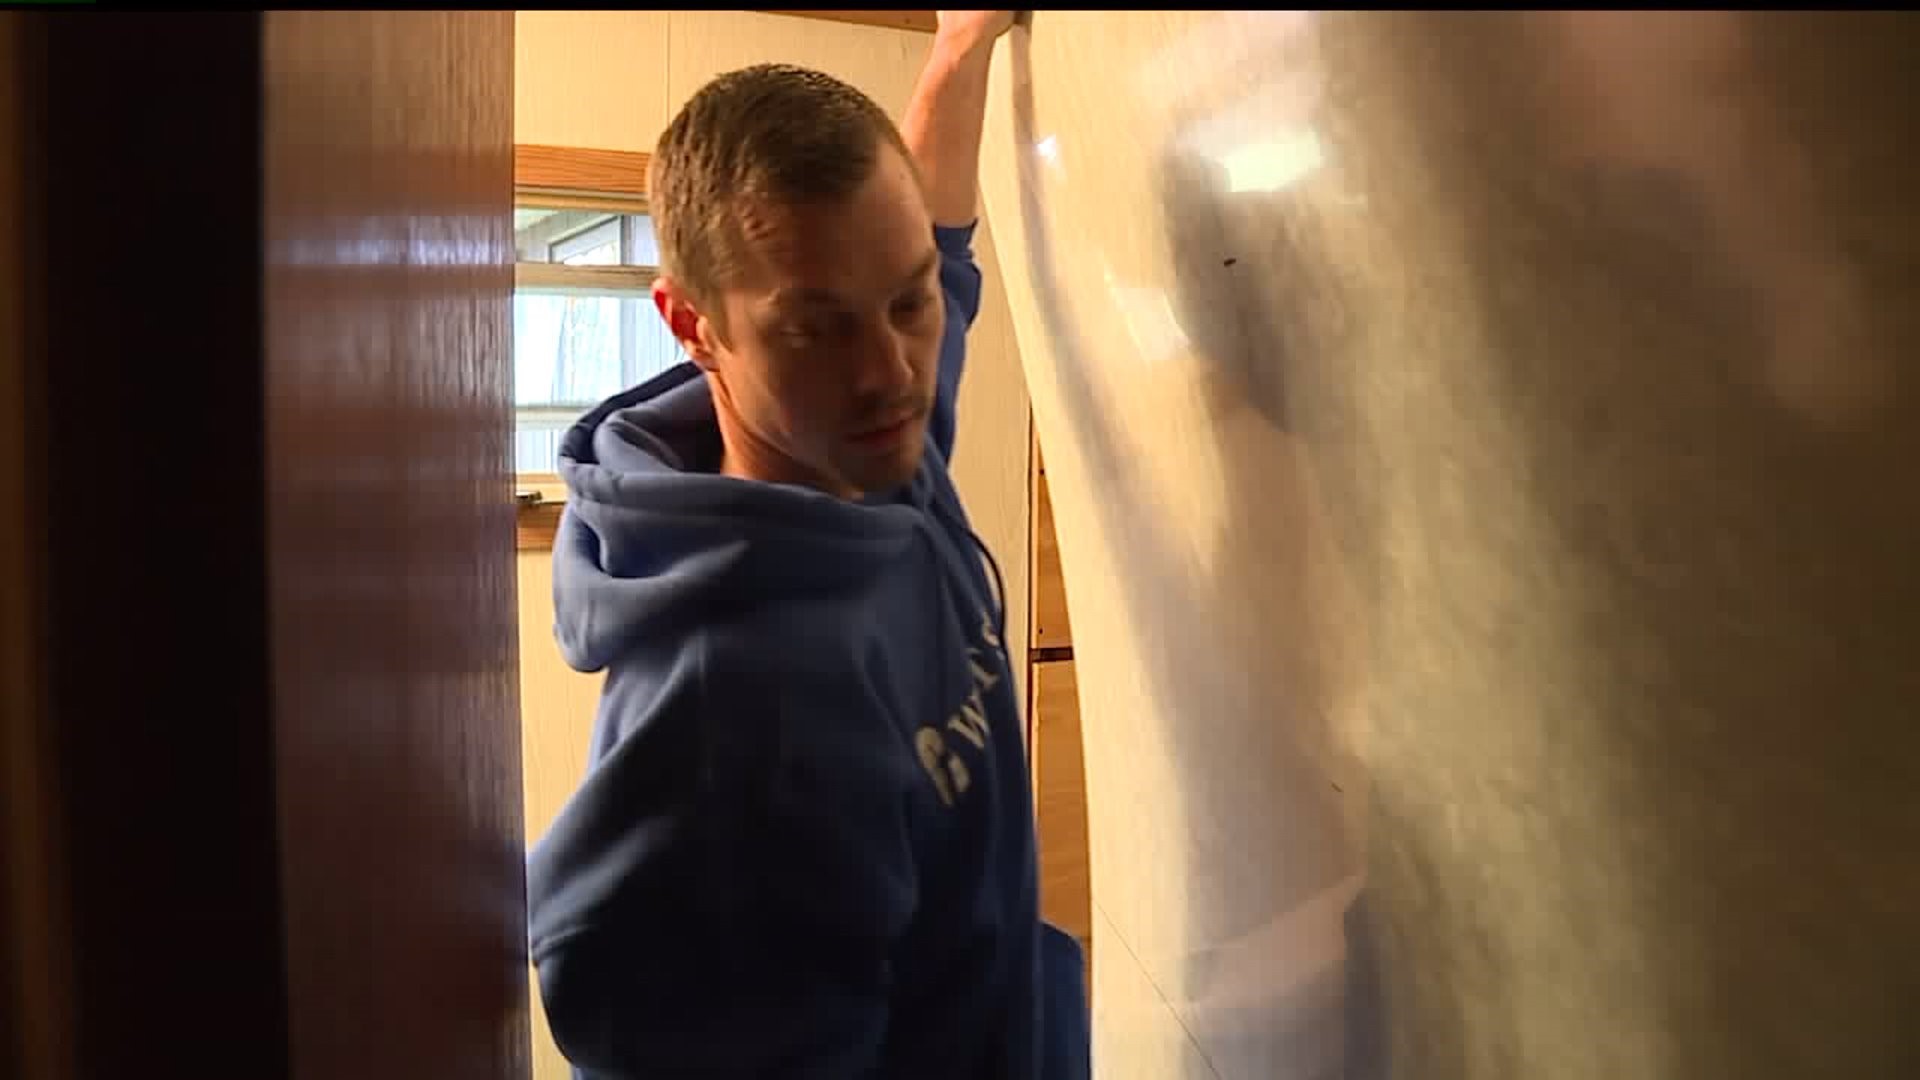 Local Veteran receives new shower system